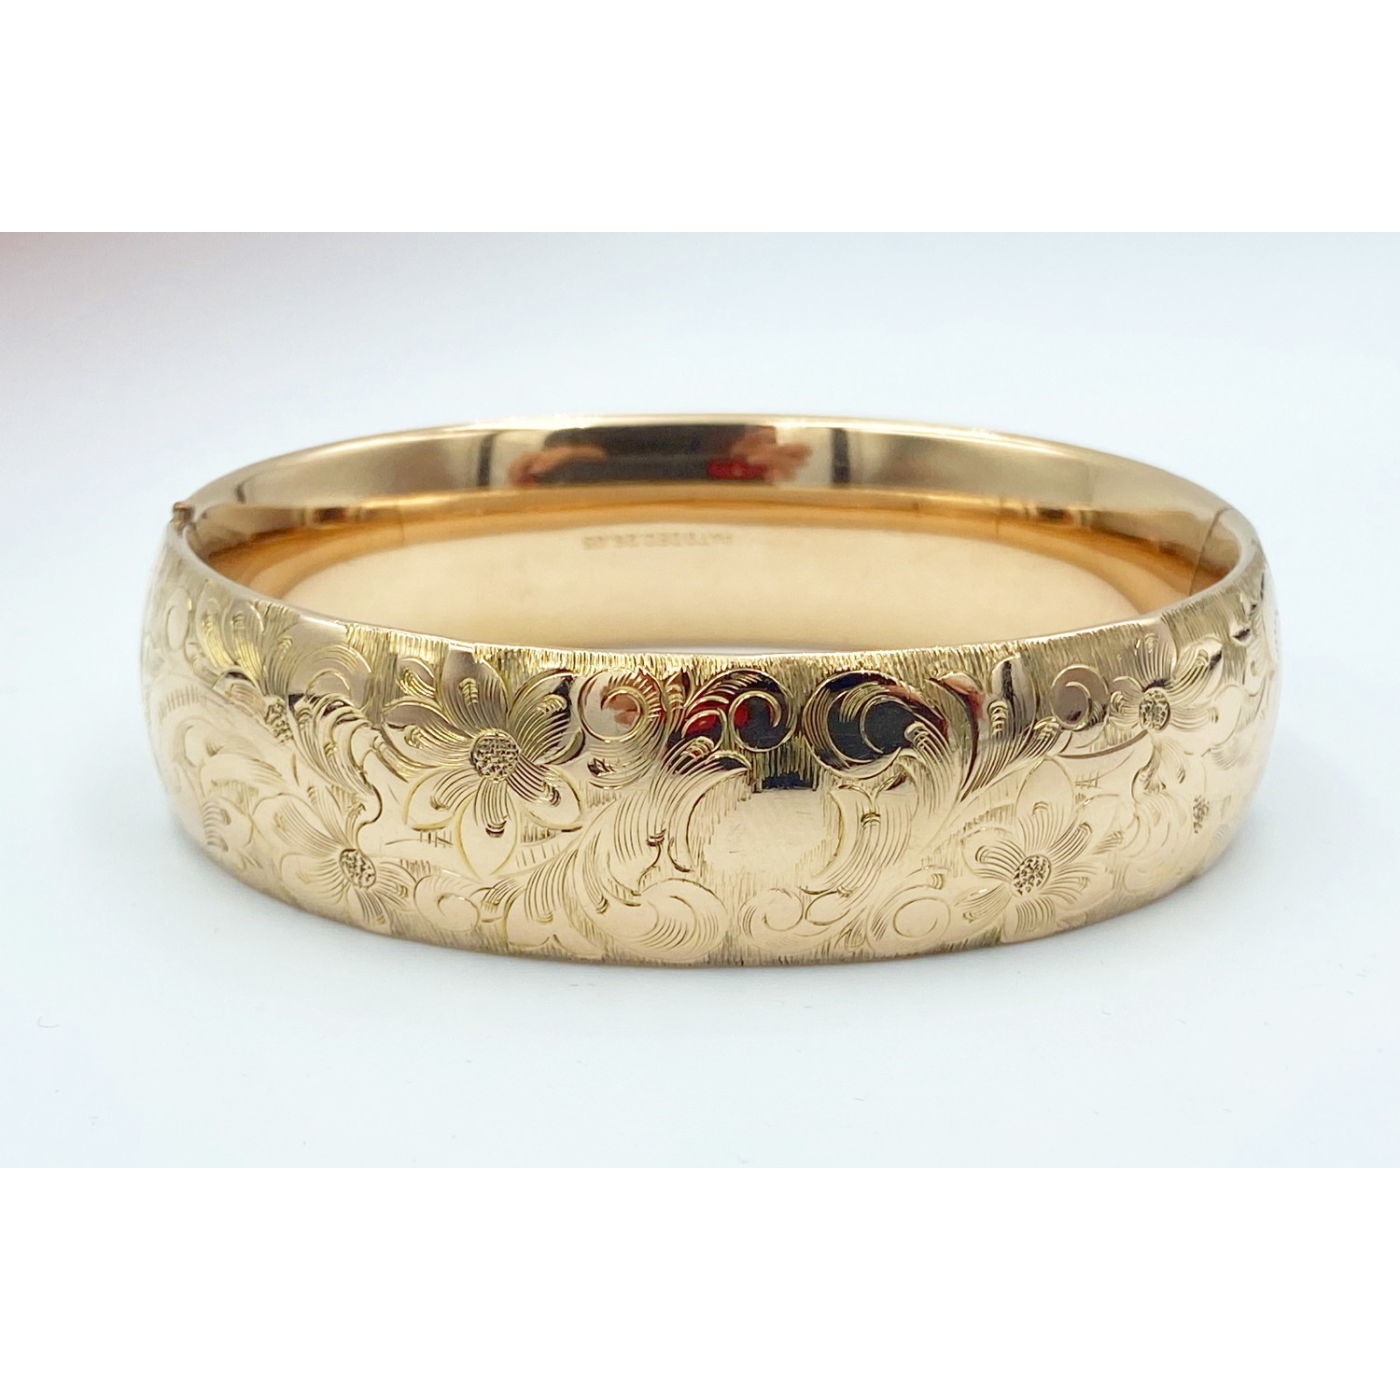 Highly Detailed 1" Wide Lovely Larger Engagement Bangle